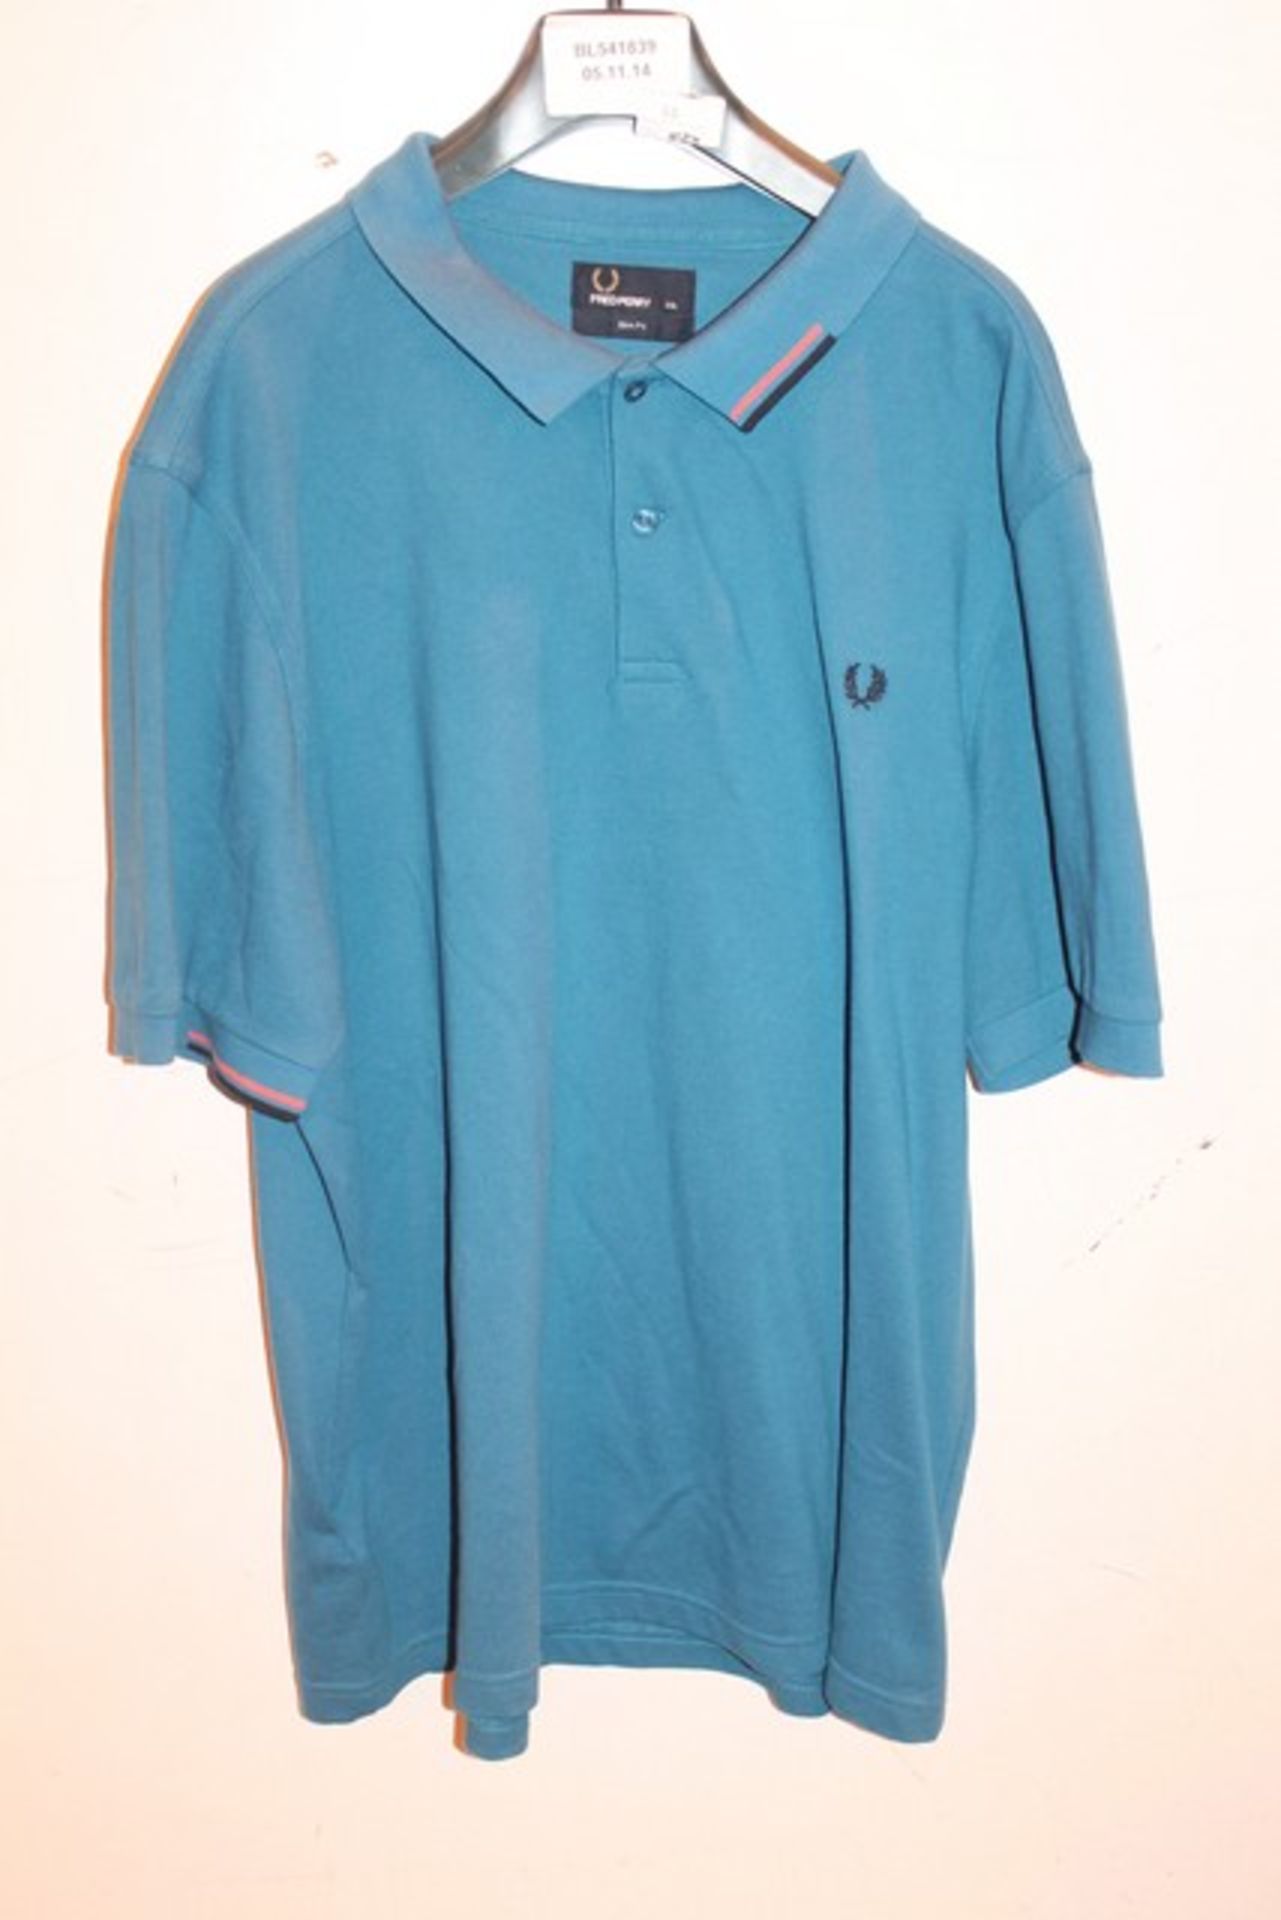 1 x SIZE XXL FRED PERRY BLUE SLIM FIT TSHIRT (541839)  *PLEASE NOTE THAT THE BID PRICE IS MULTIPLIED